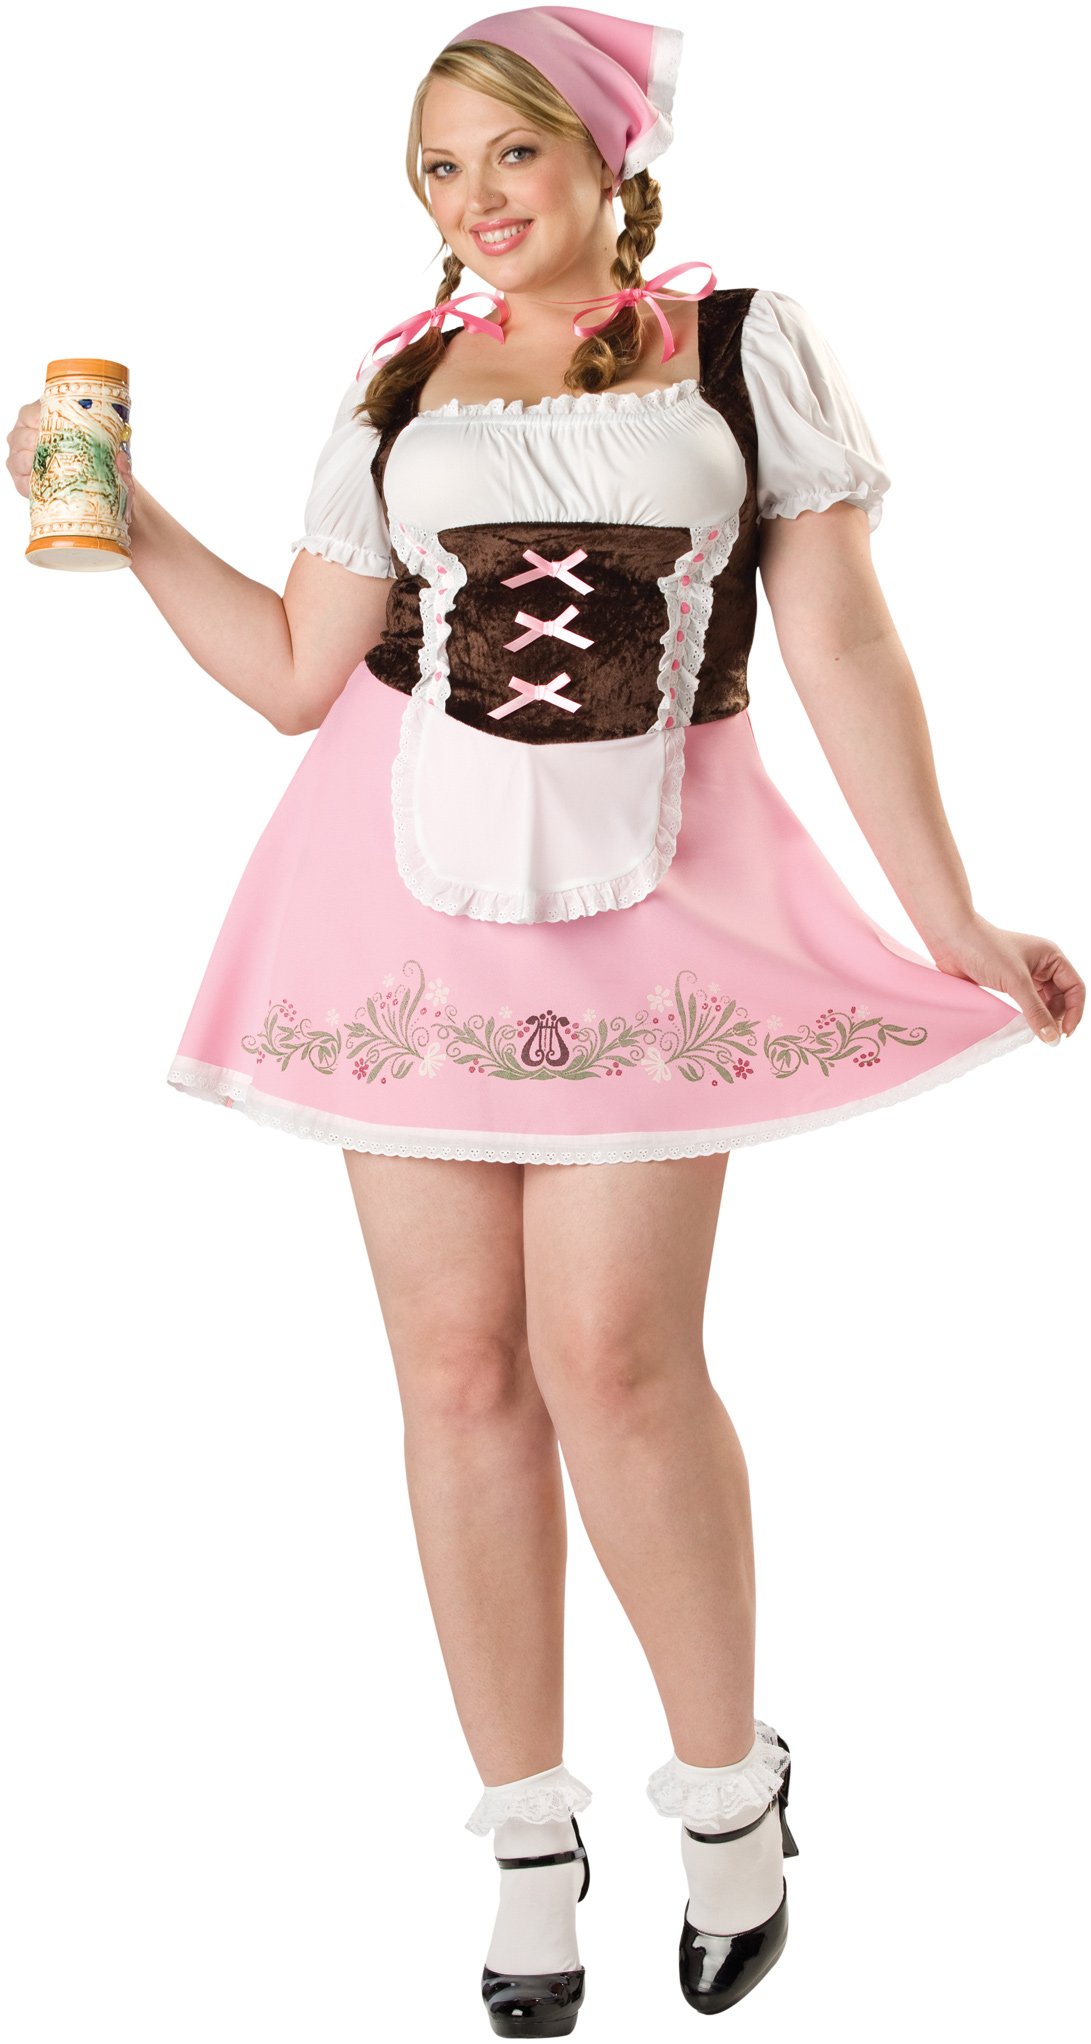 Fetching Fraulein Plus Adult Costume